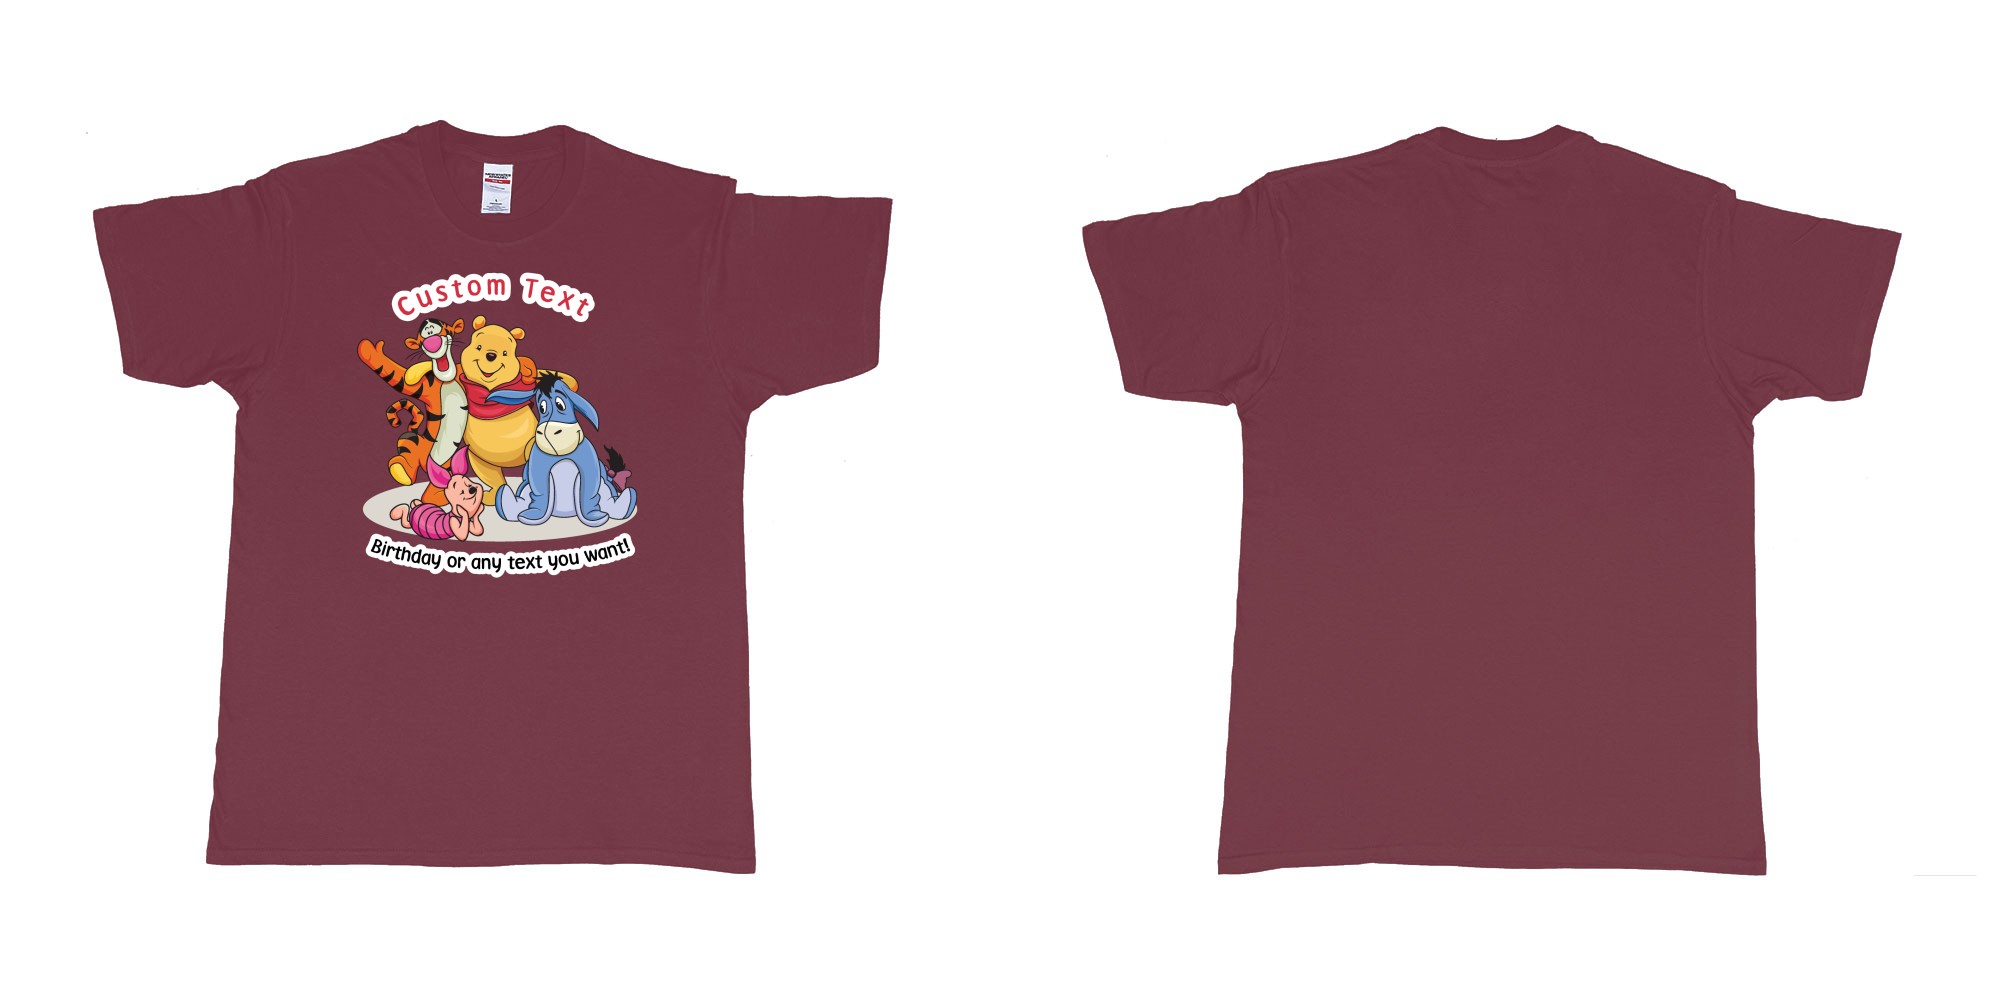 Custom tshirt design winnie the pooh and friend in fabric color marron choice your own text made in Bali by The Pirate Way